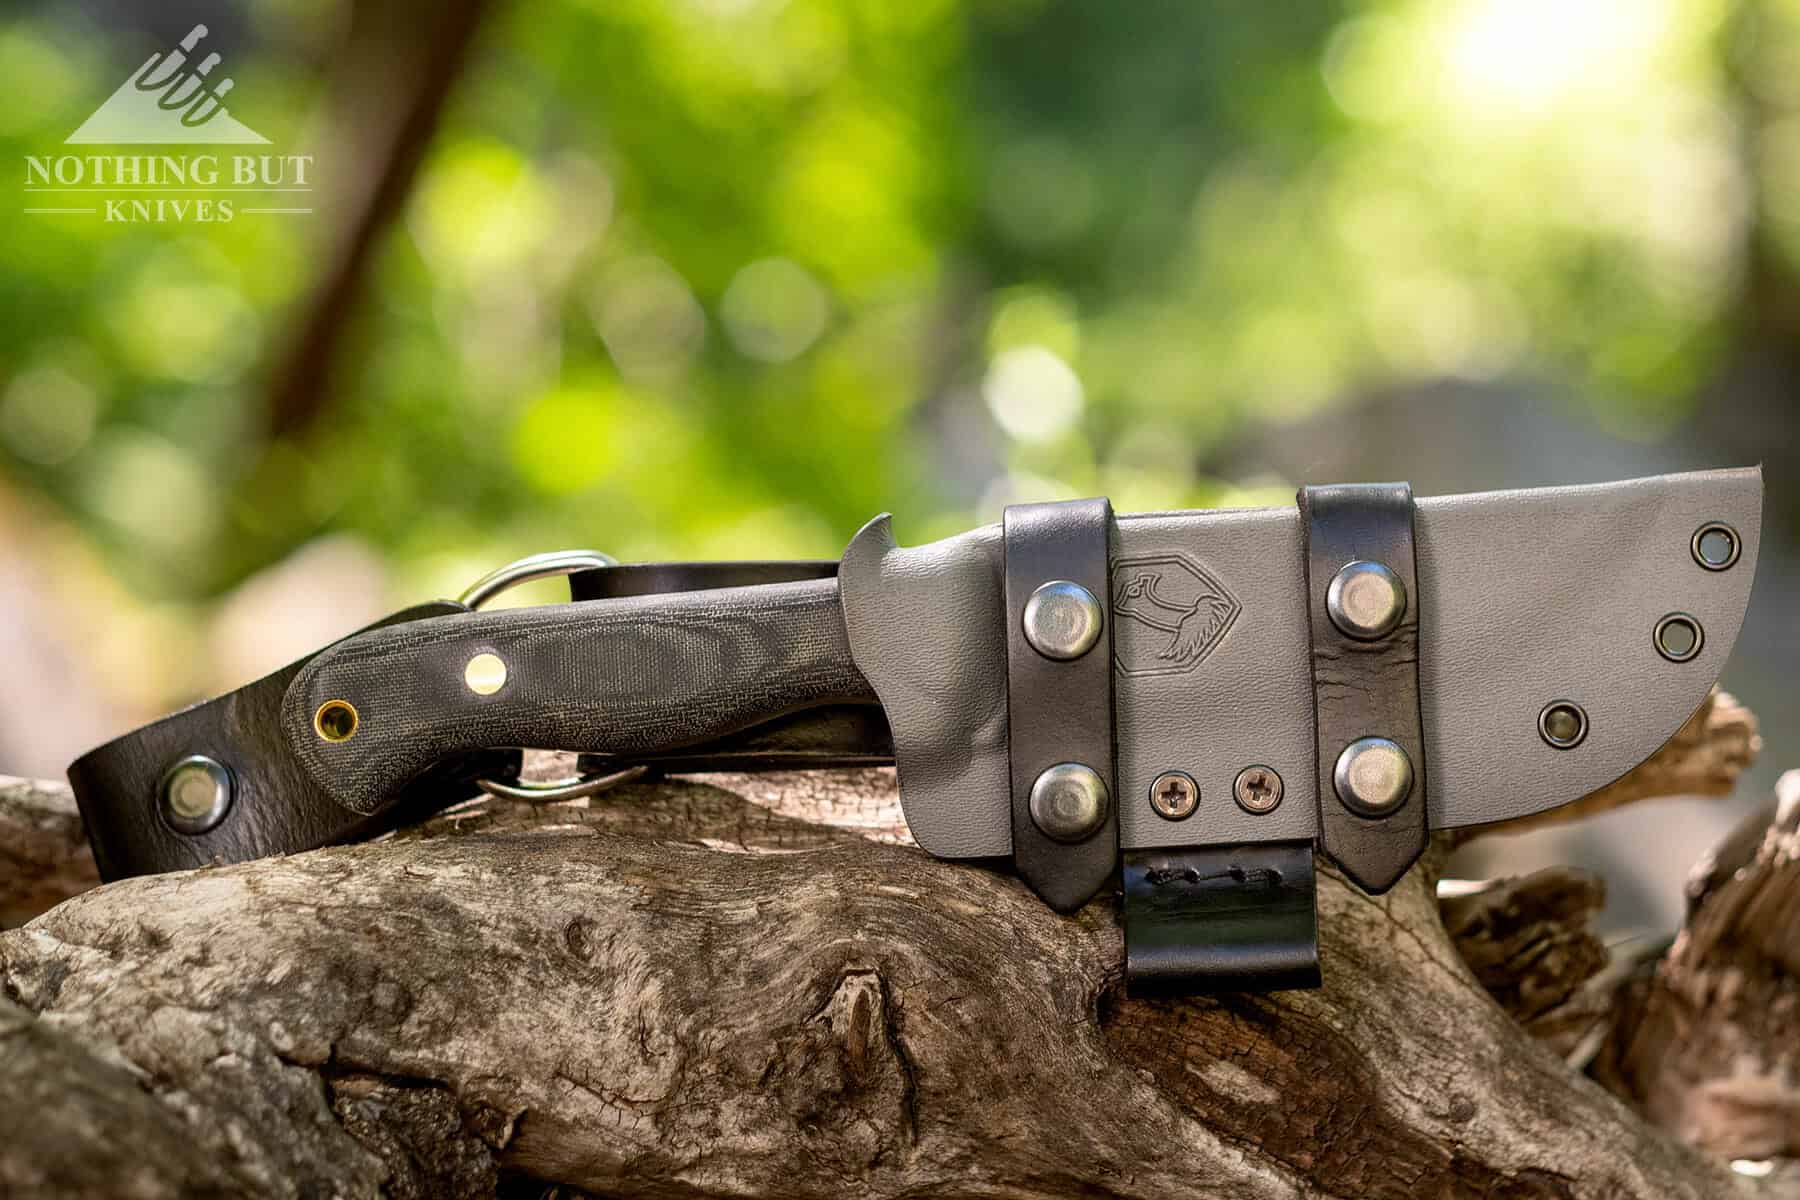 The Condor SBK with it's sheath sitting on a log in the wilderness.